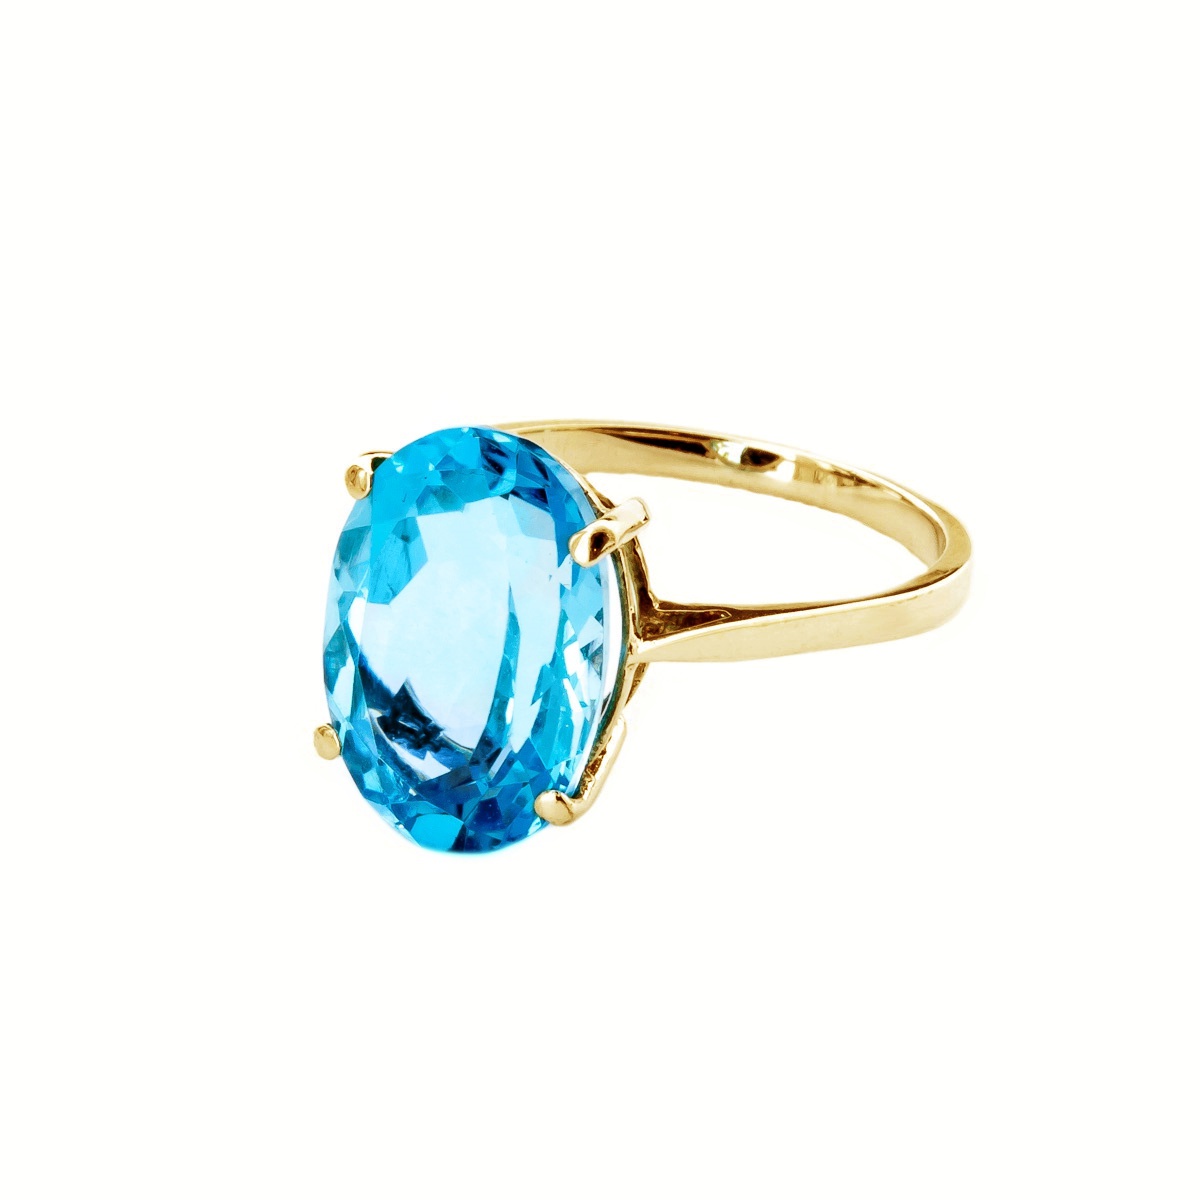 Galaxy Gold 14k High Polished Solid Yellow Gold Ring 8 Carat Natural Oval Blue Topaz (6.5) - image 2 of 5